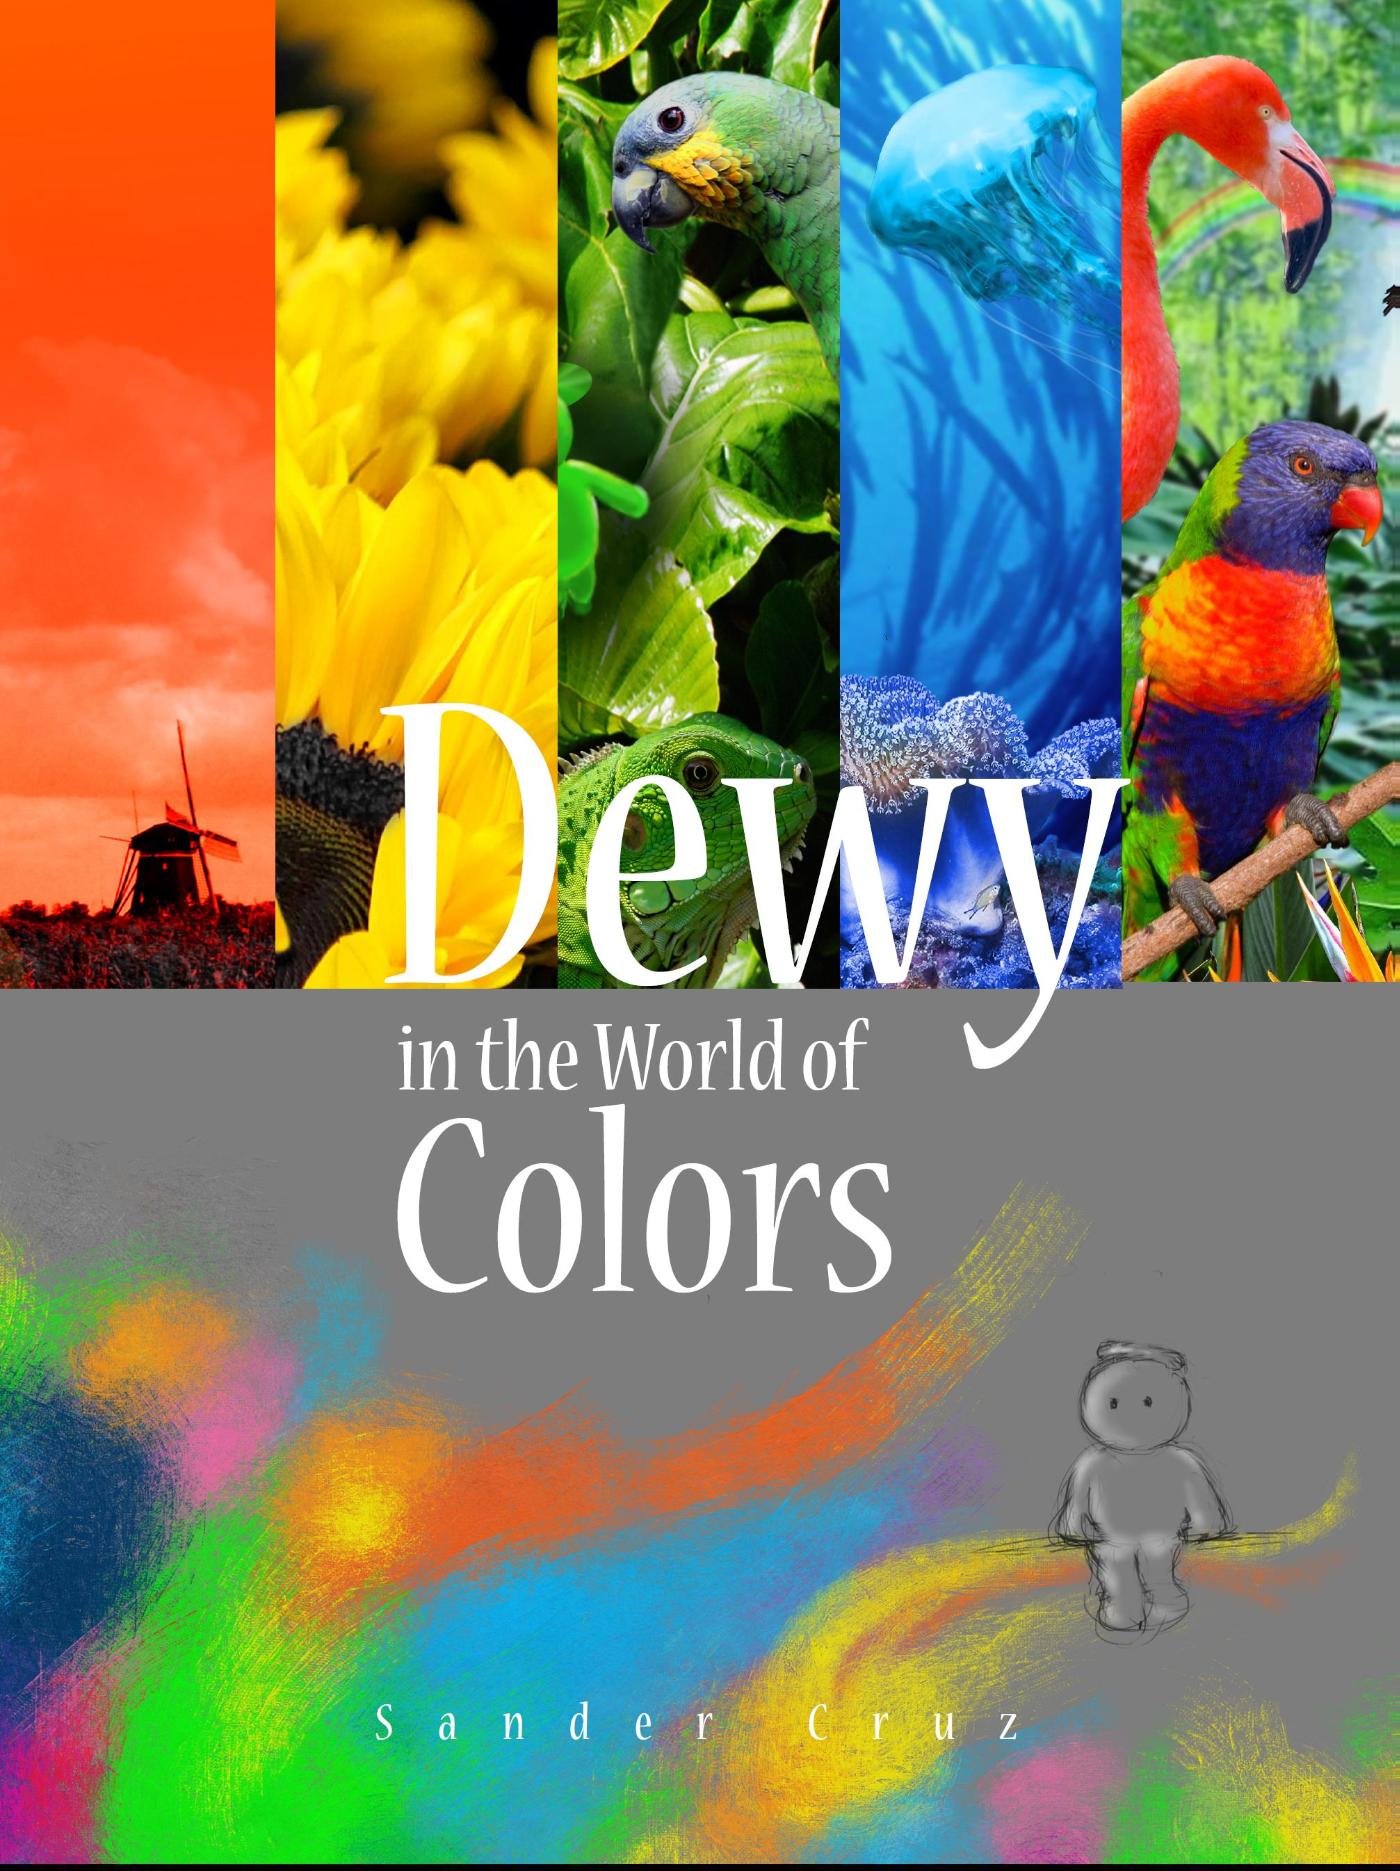 Dewy in the World of Colors (Ebook)